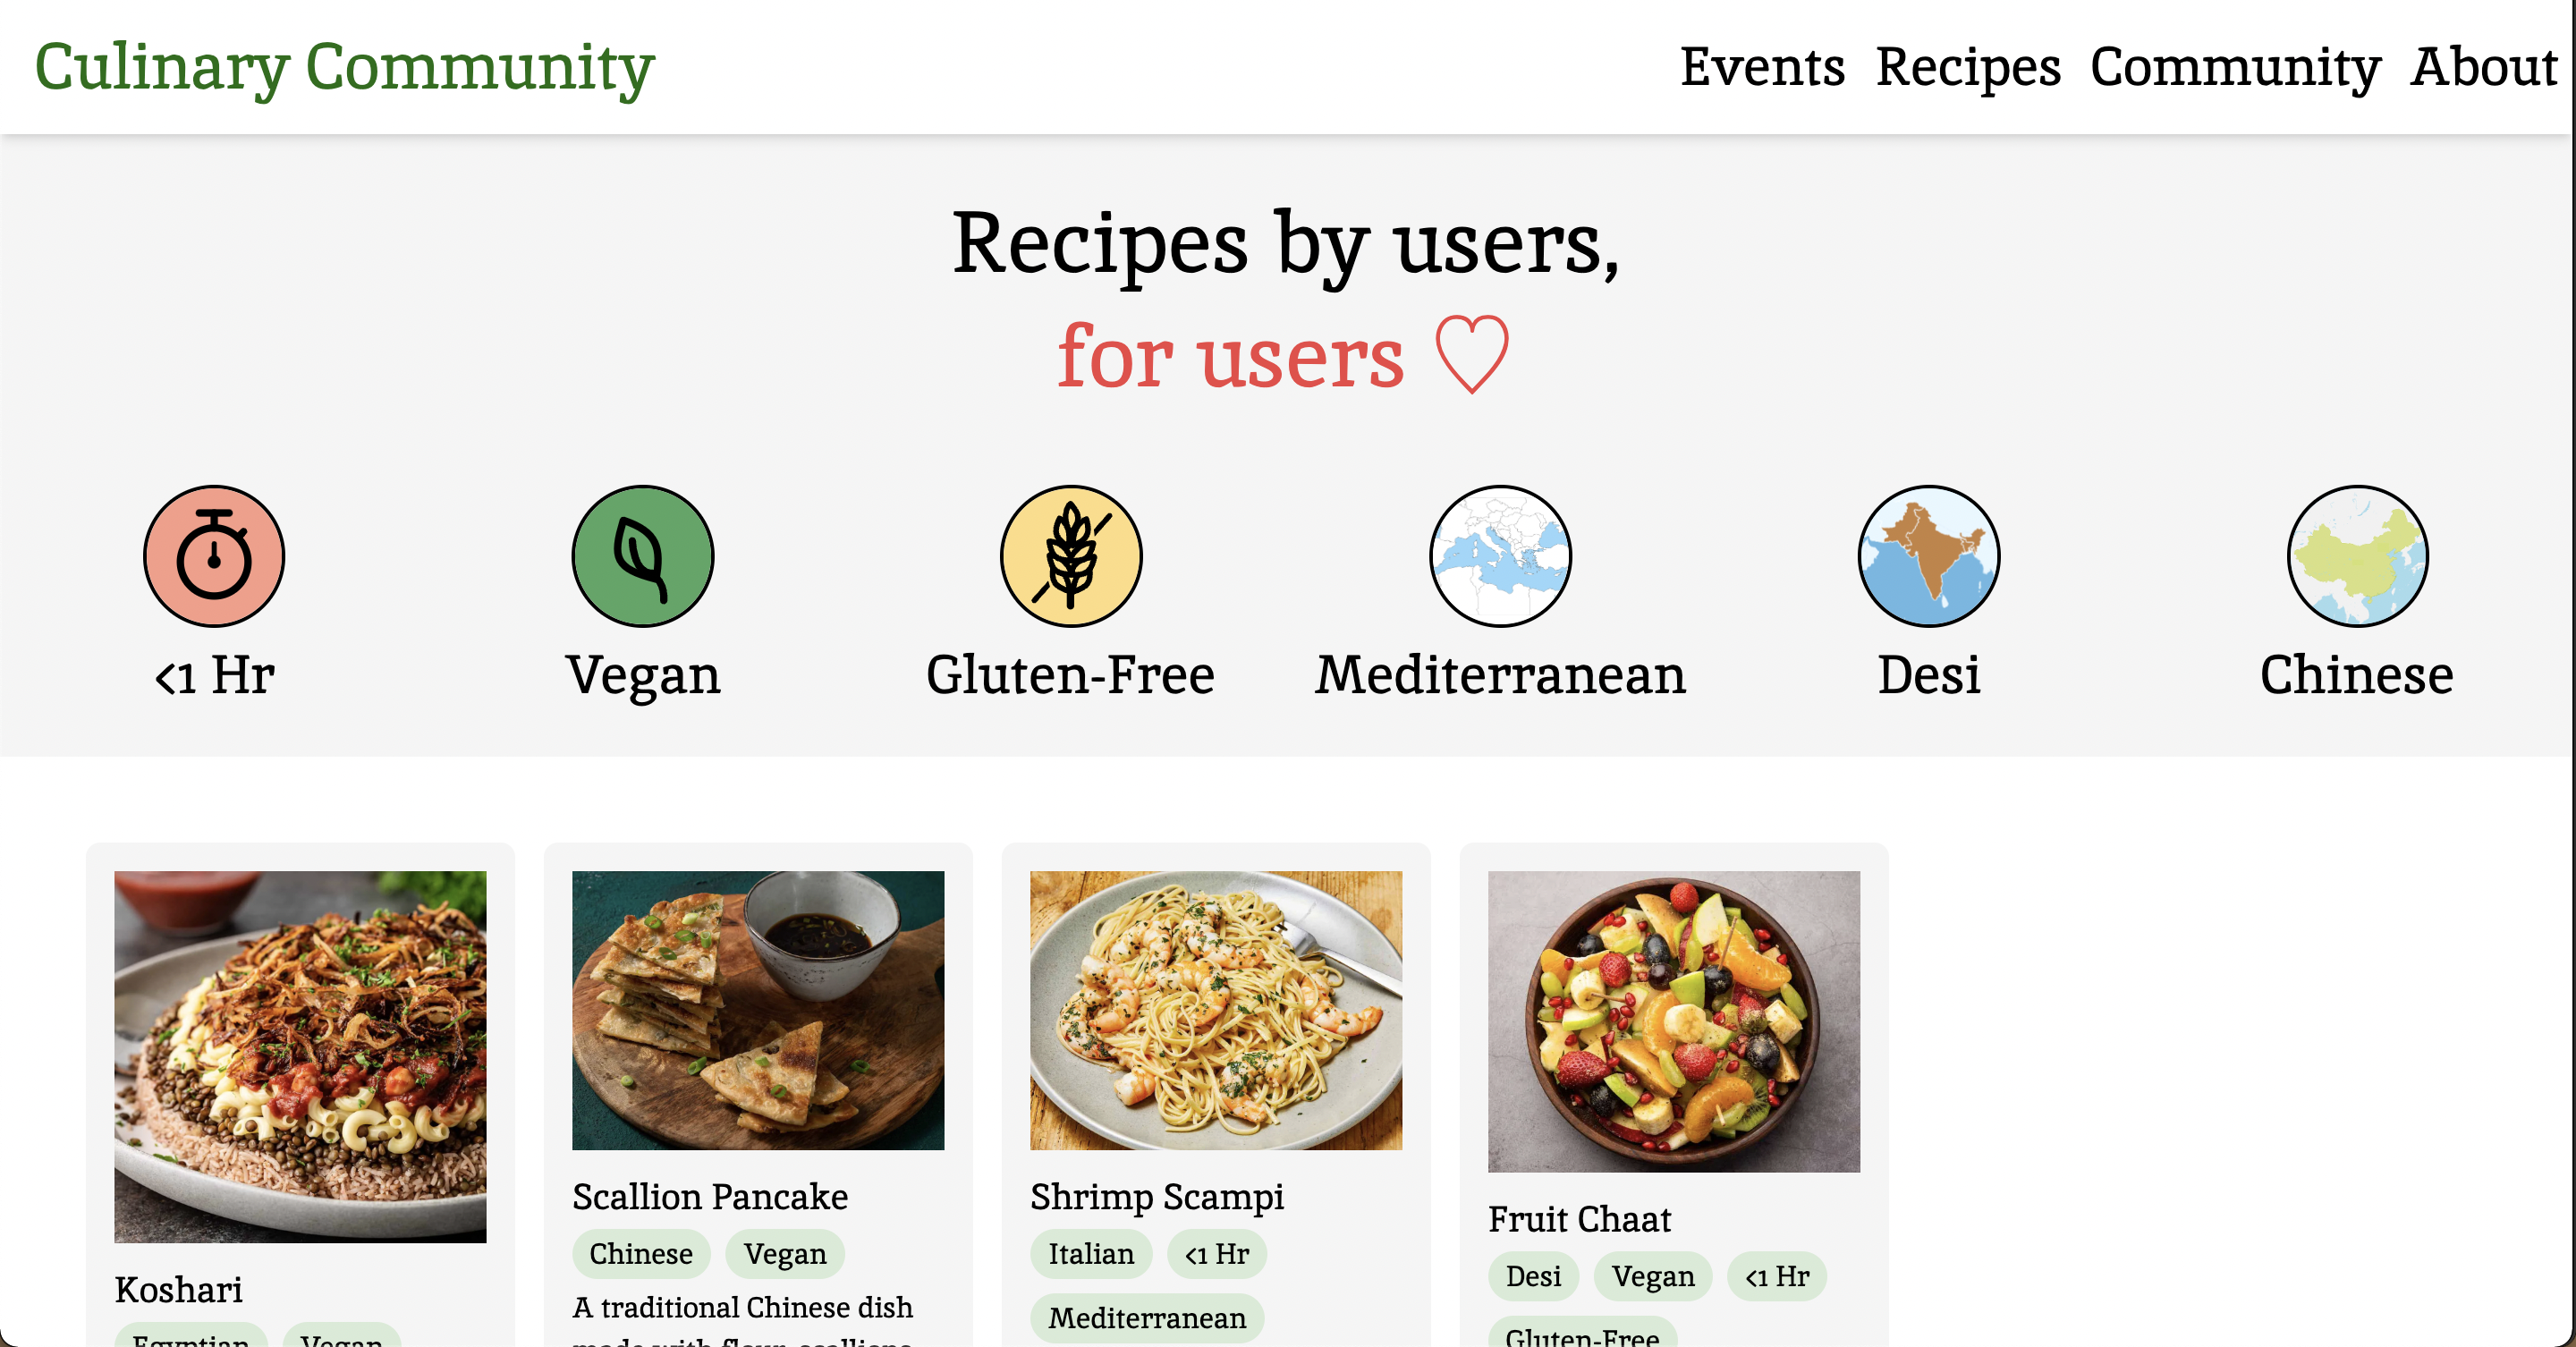 The recipes page of Culinary Community